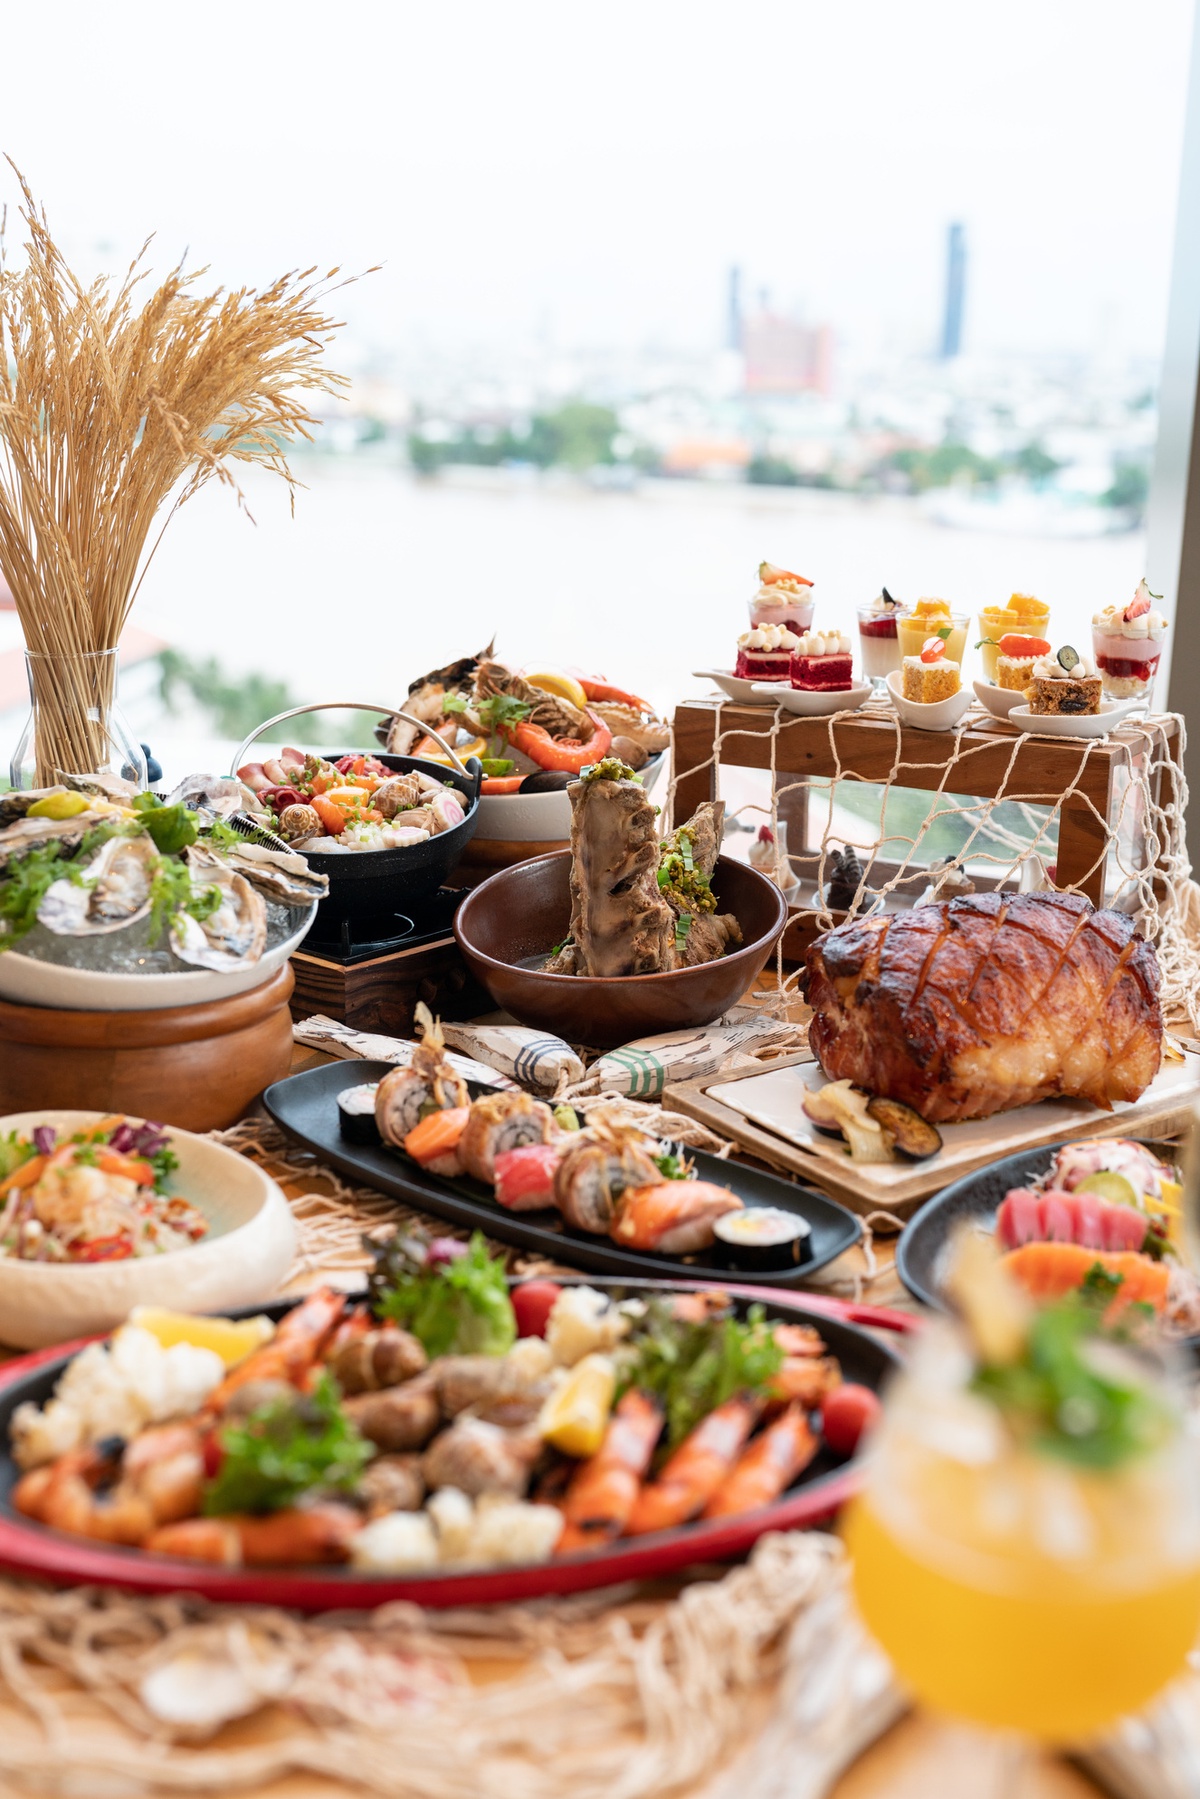 CLAWS OUT: BOTTOMLESS SEAFOOD BUFFET IS BACK AT SKYLINE AT AVANI RIVERSIDE